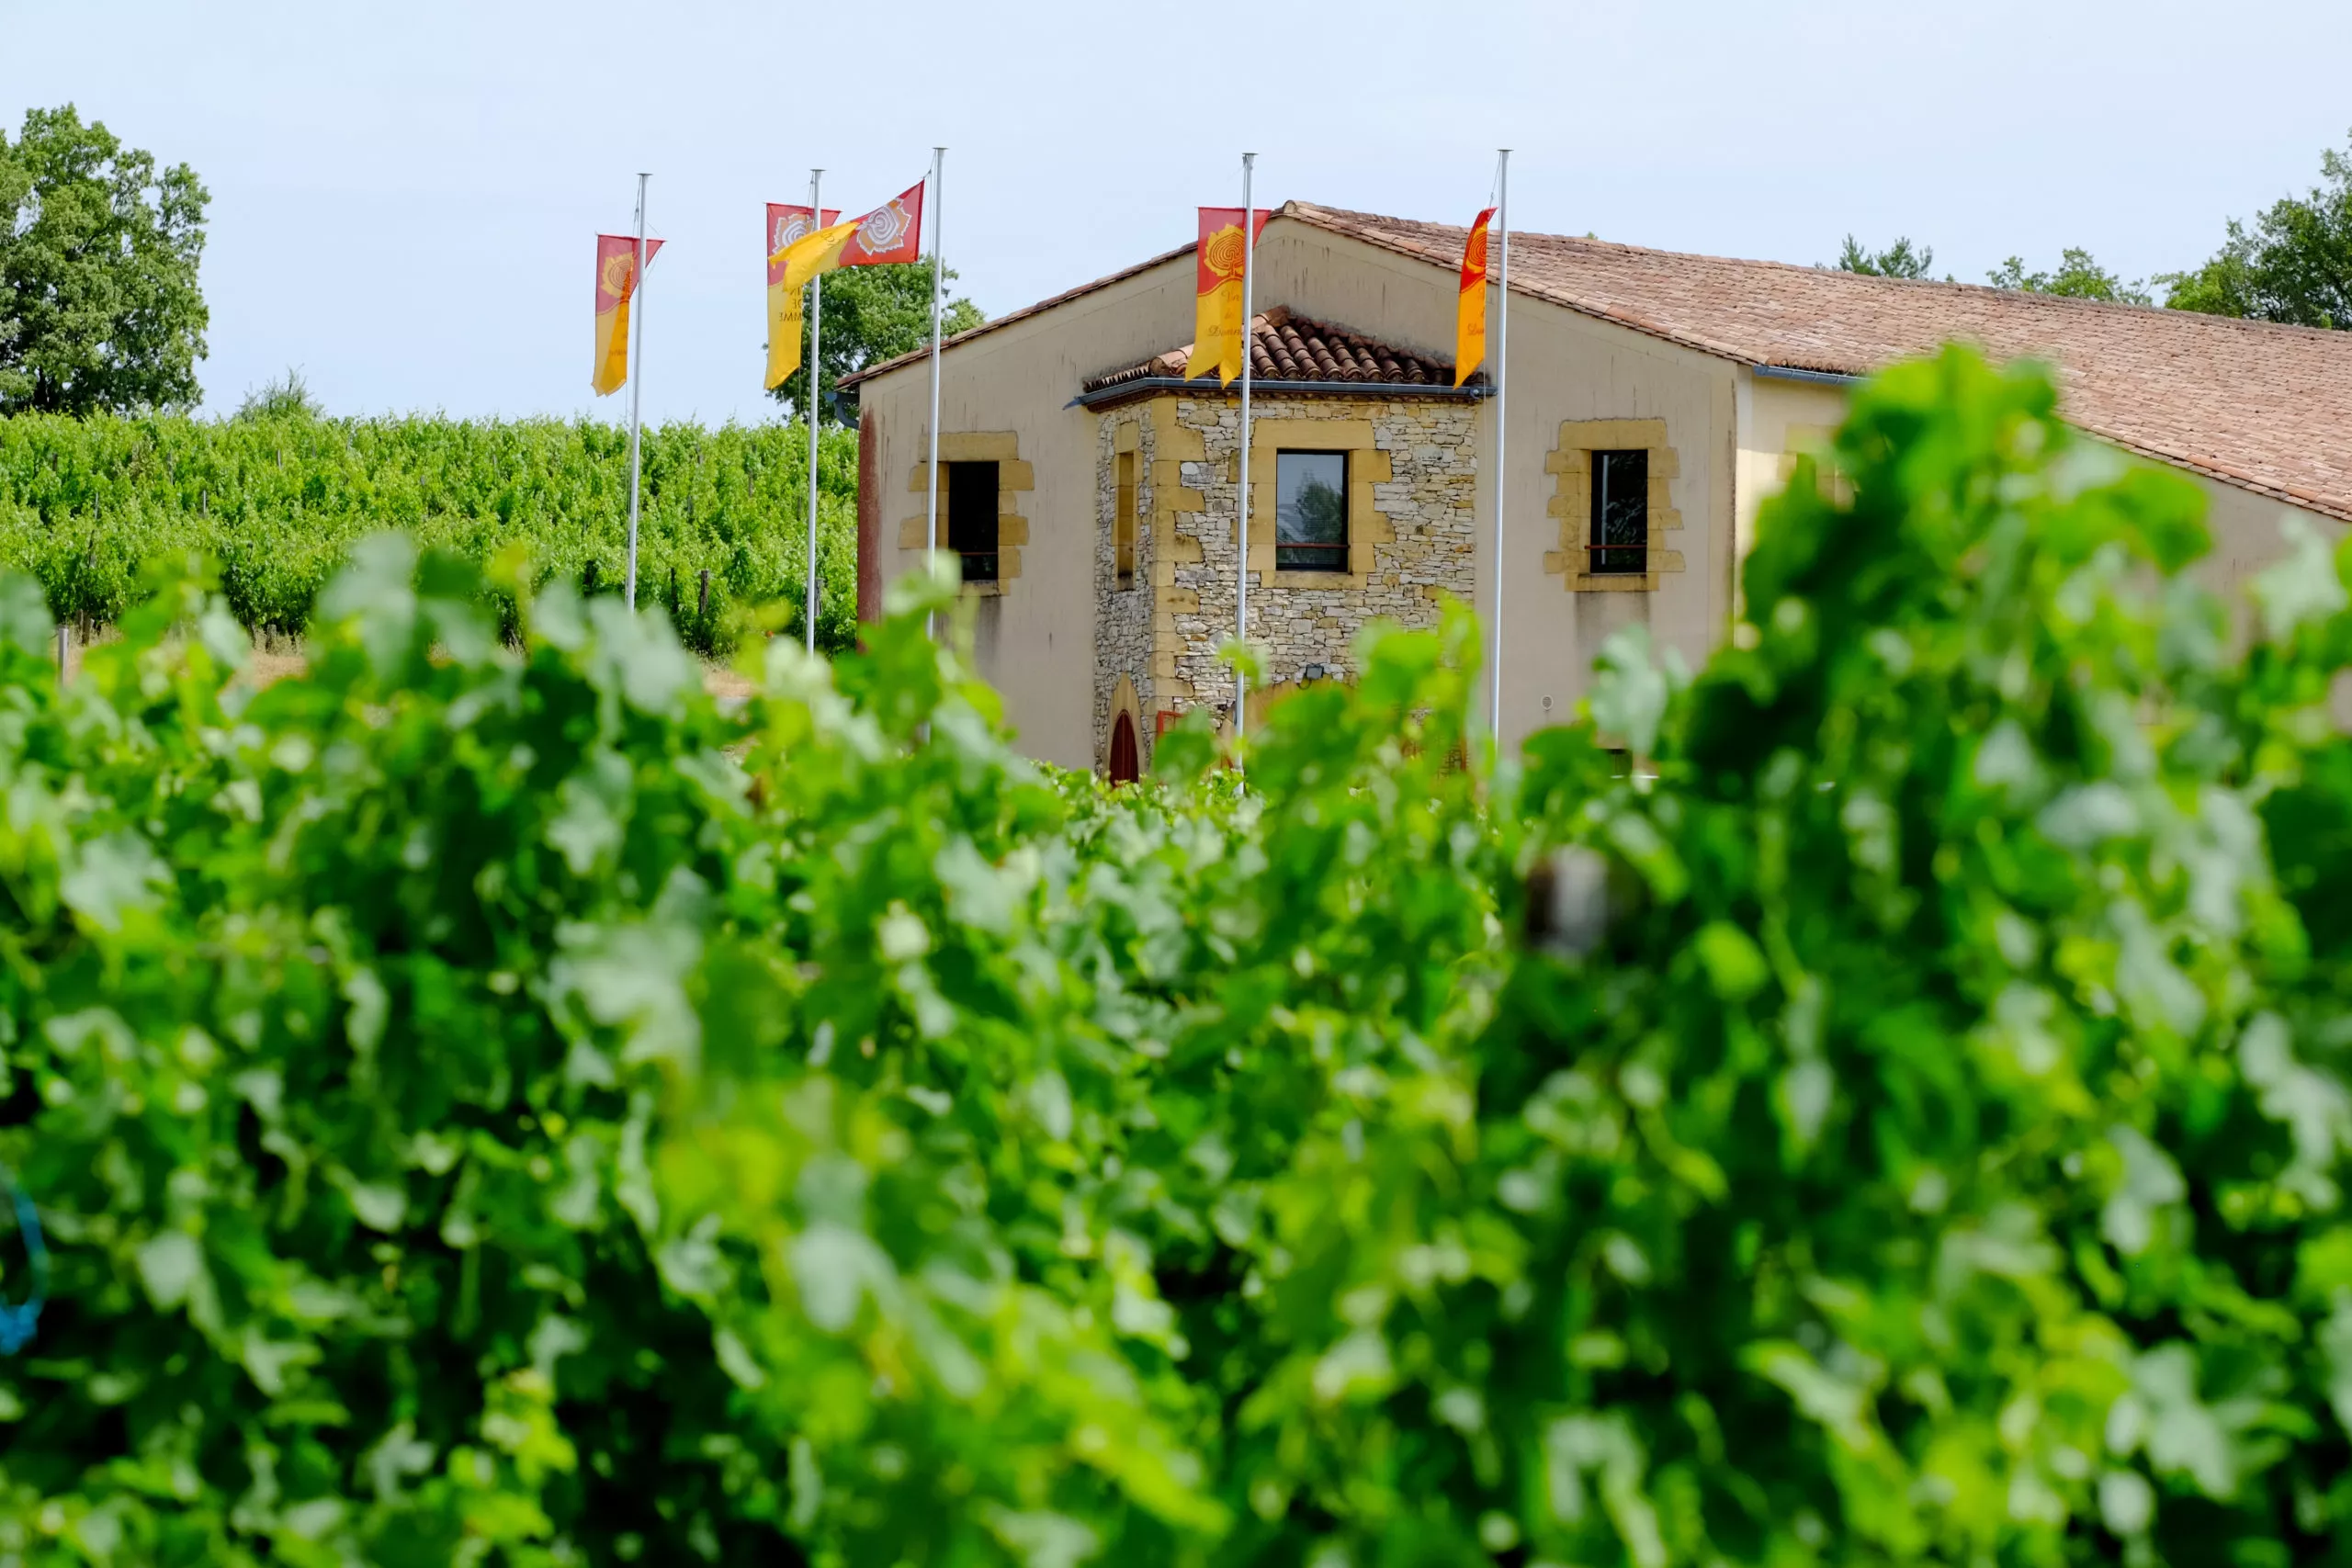 Domme Wine in France, Europe | Wineries - Rated 0.9